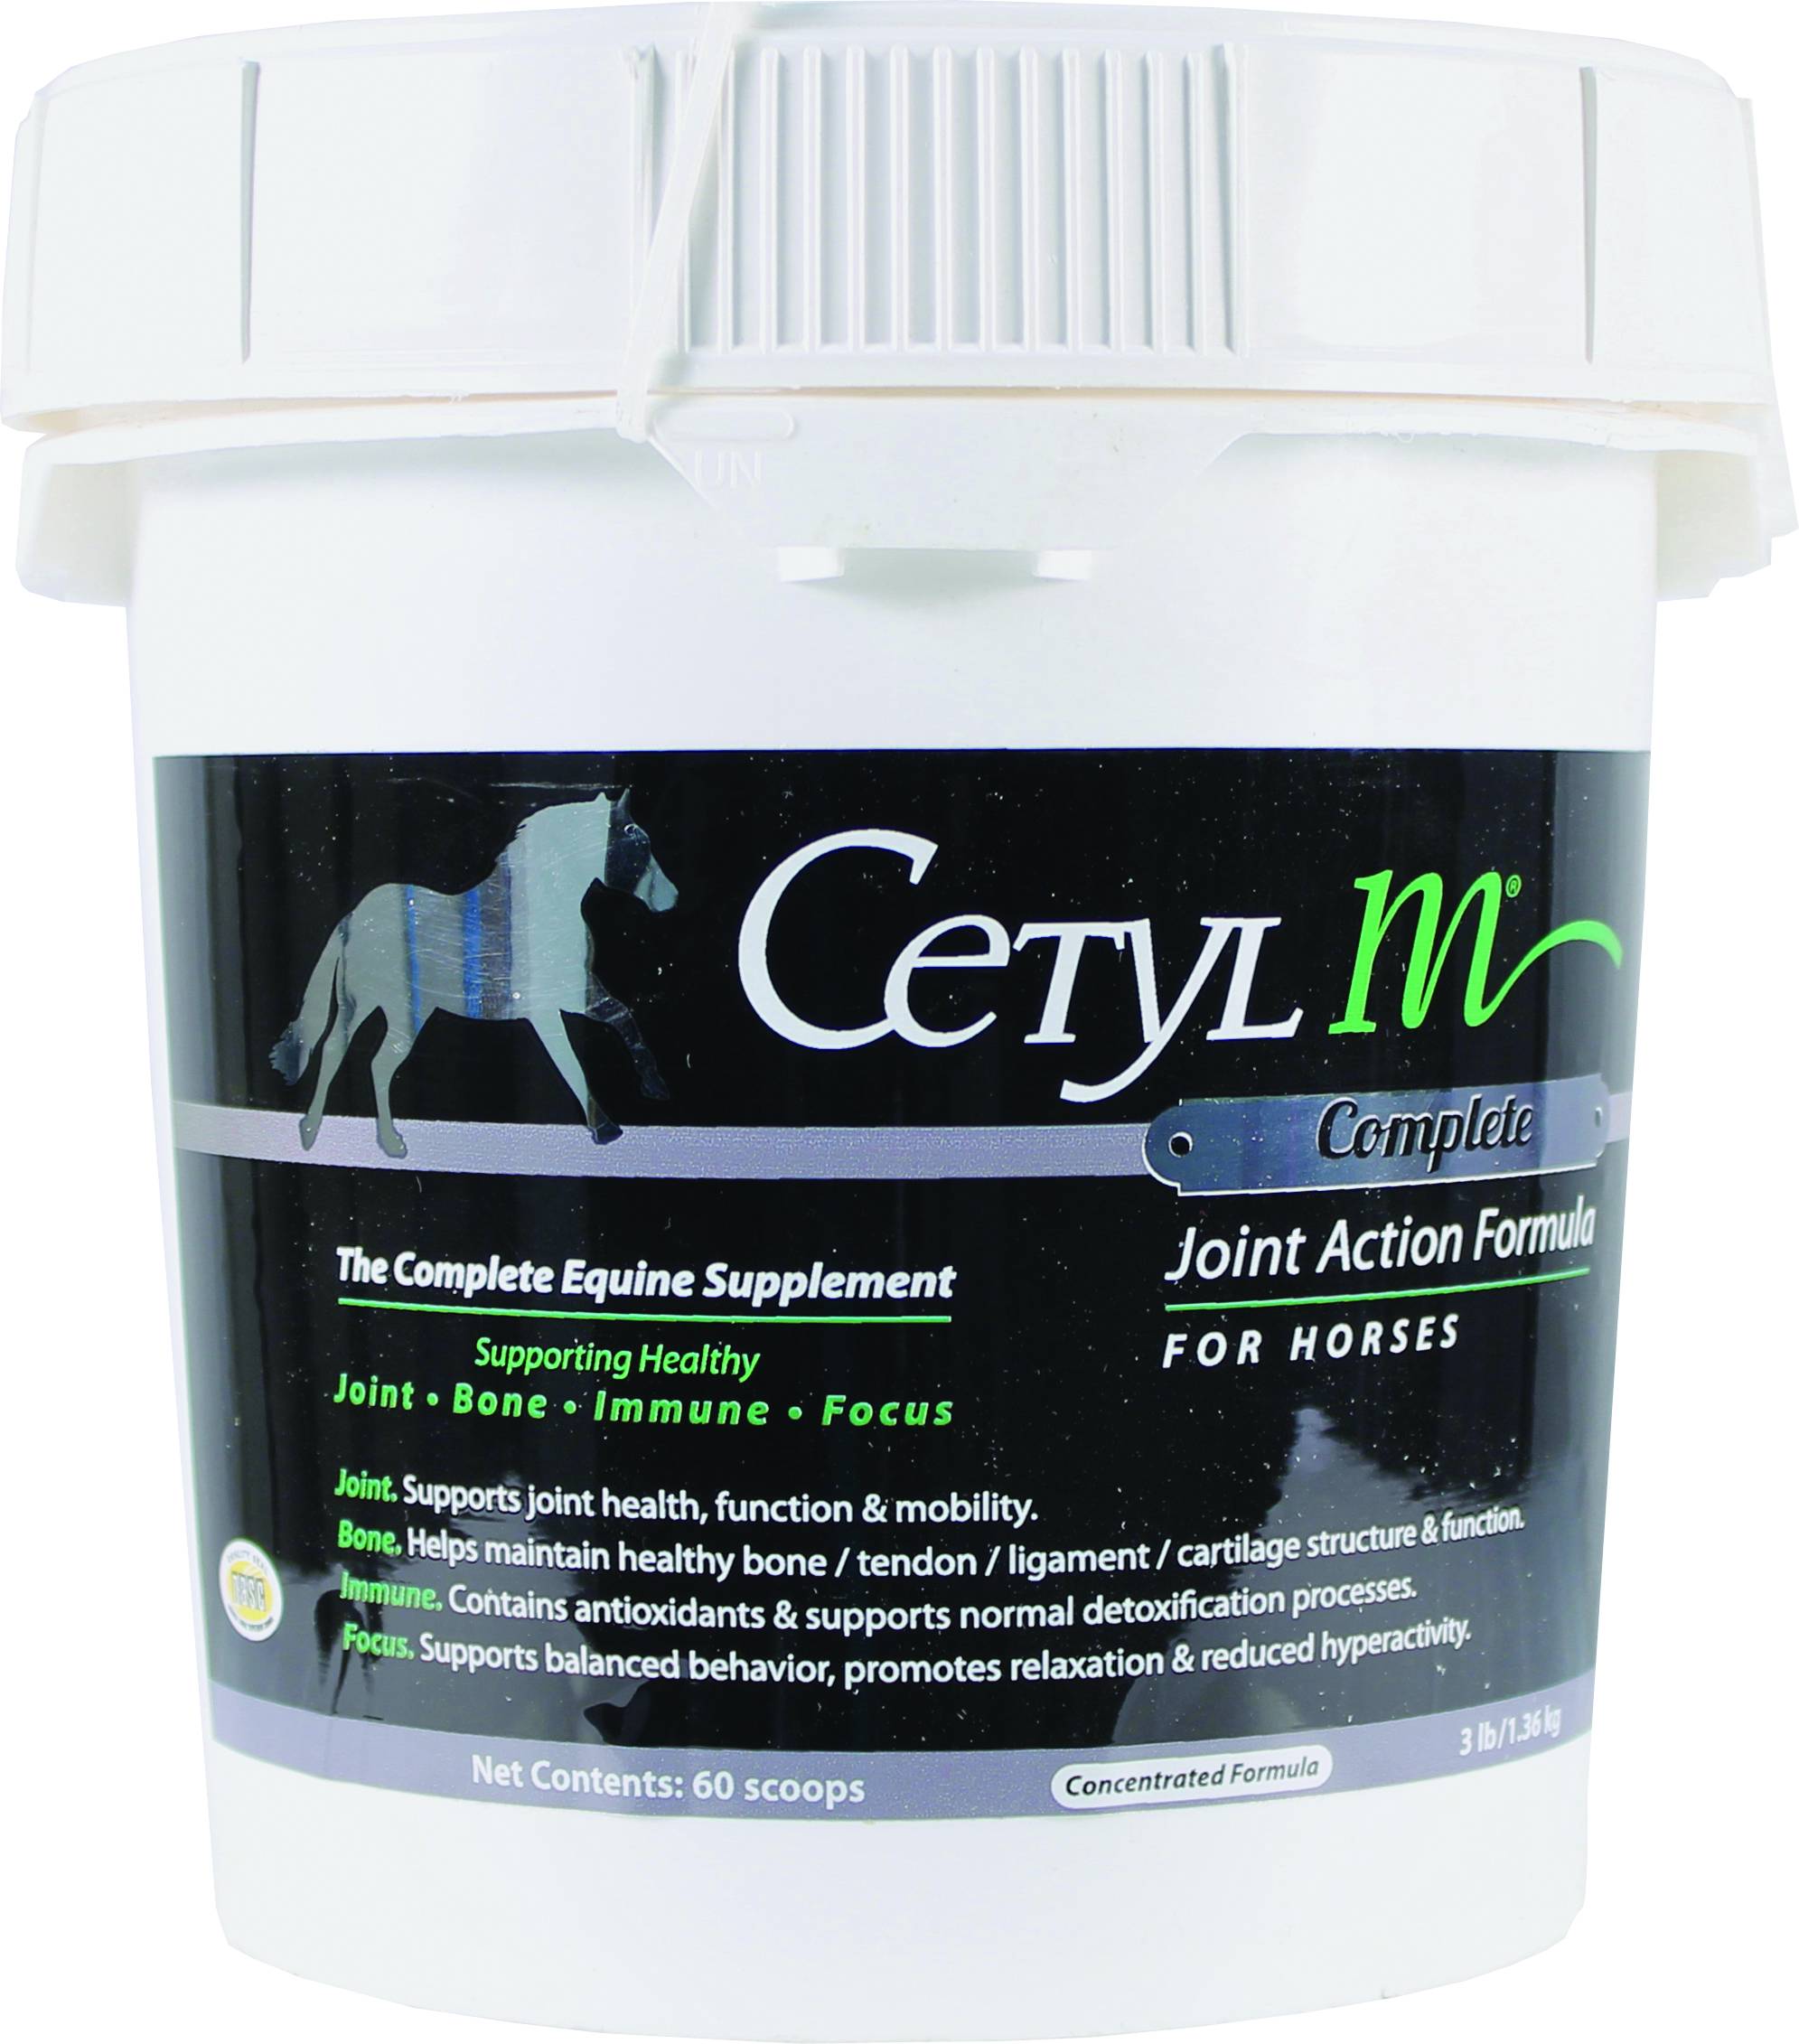 UPC 686960000177 product image for Cetyl M Complete Joint Action Formula For Horses | upcitemdb.com